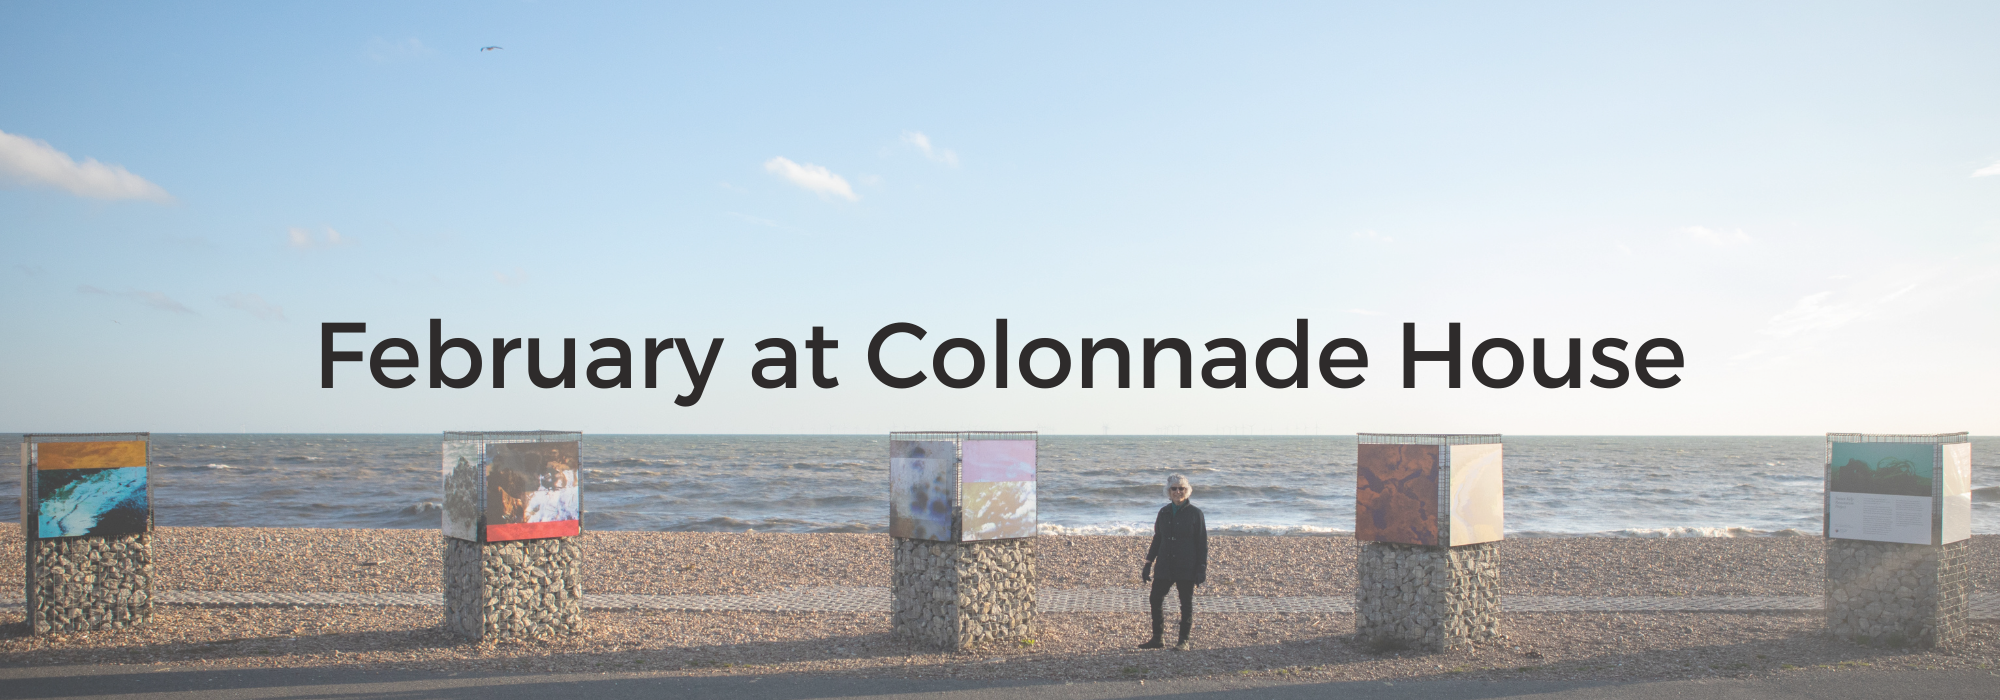 February at Colonnade House